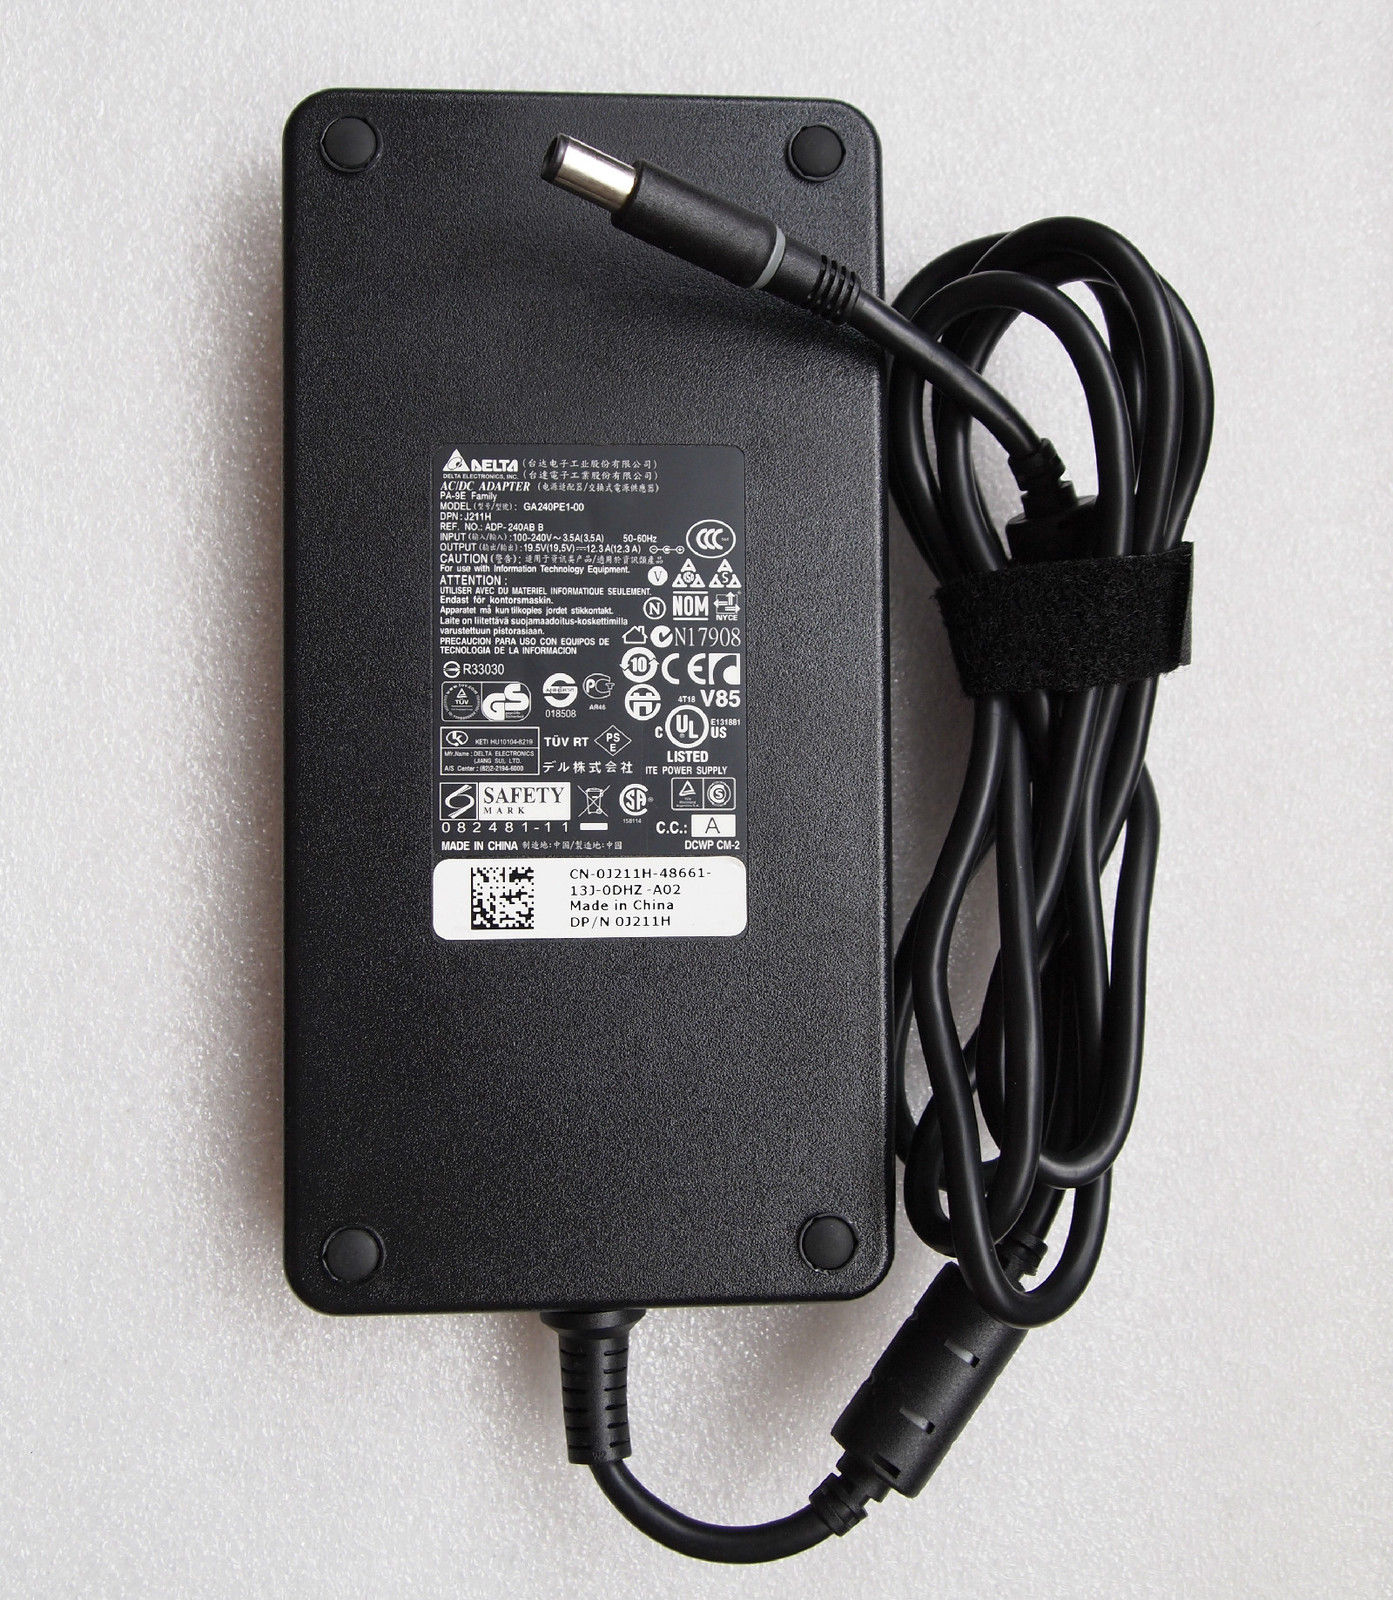 240W Dell Precision M6600 Mobile Workstation AC Adapter Power